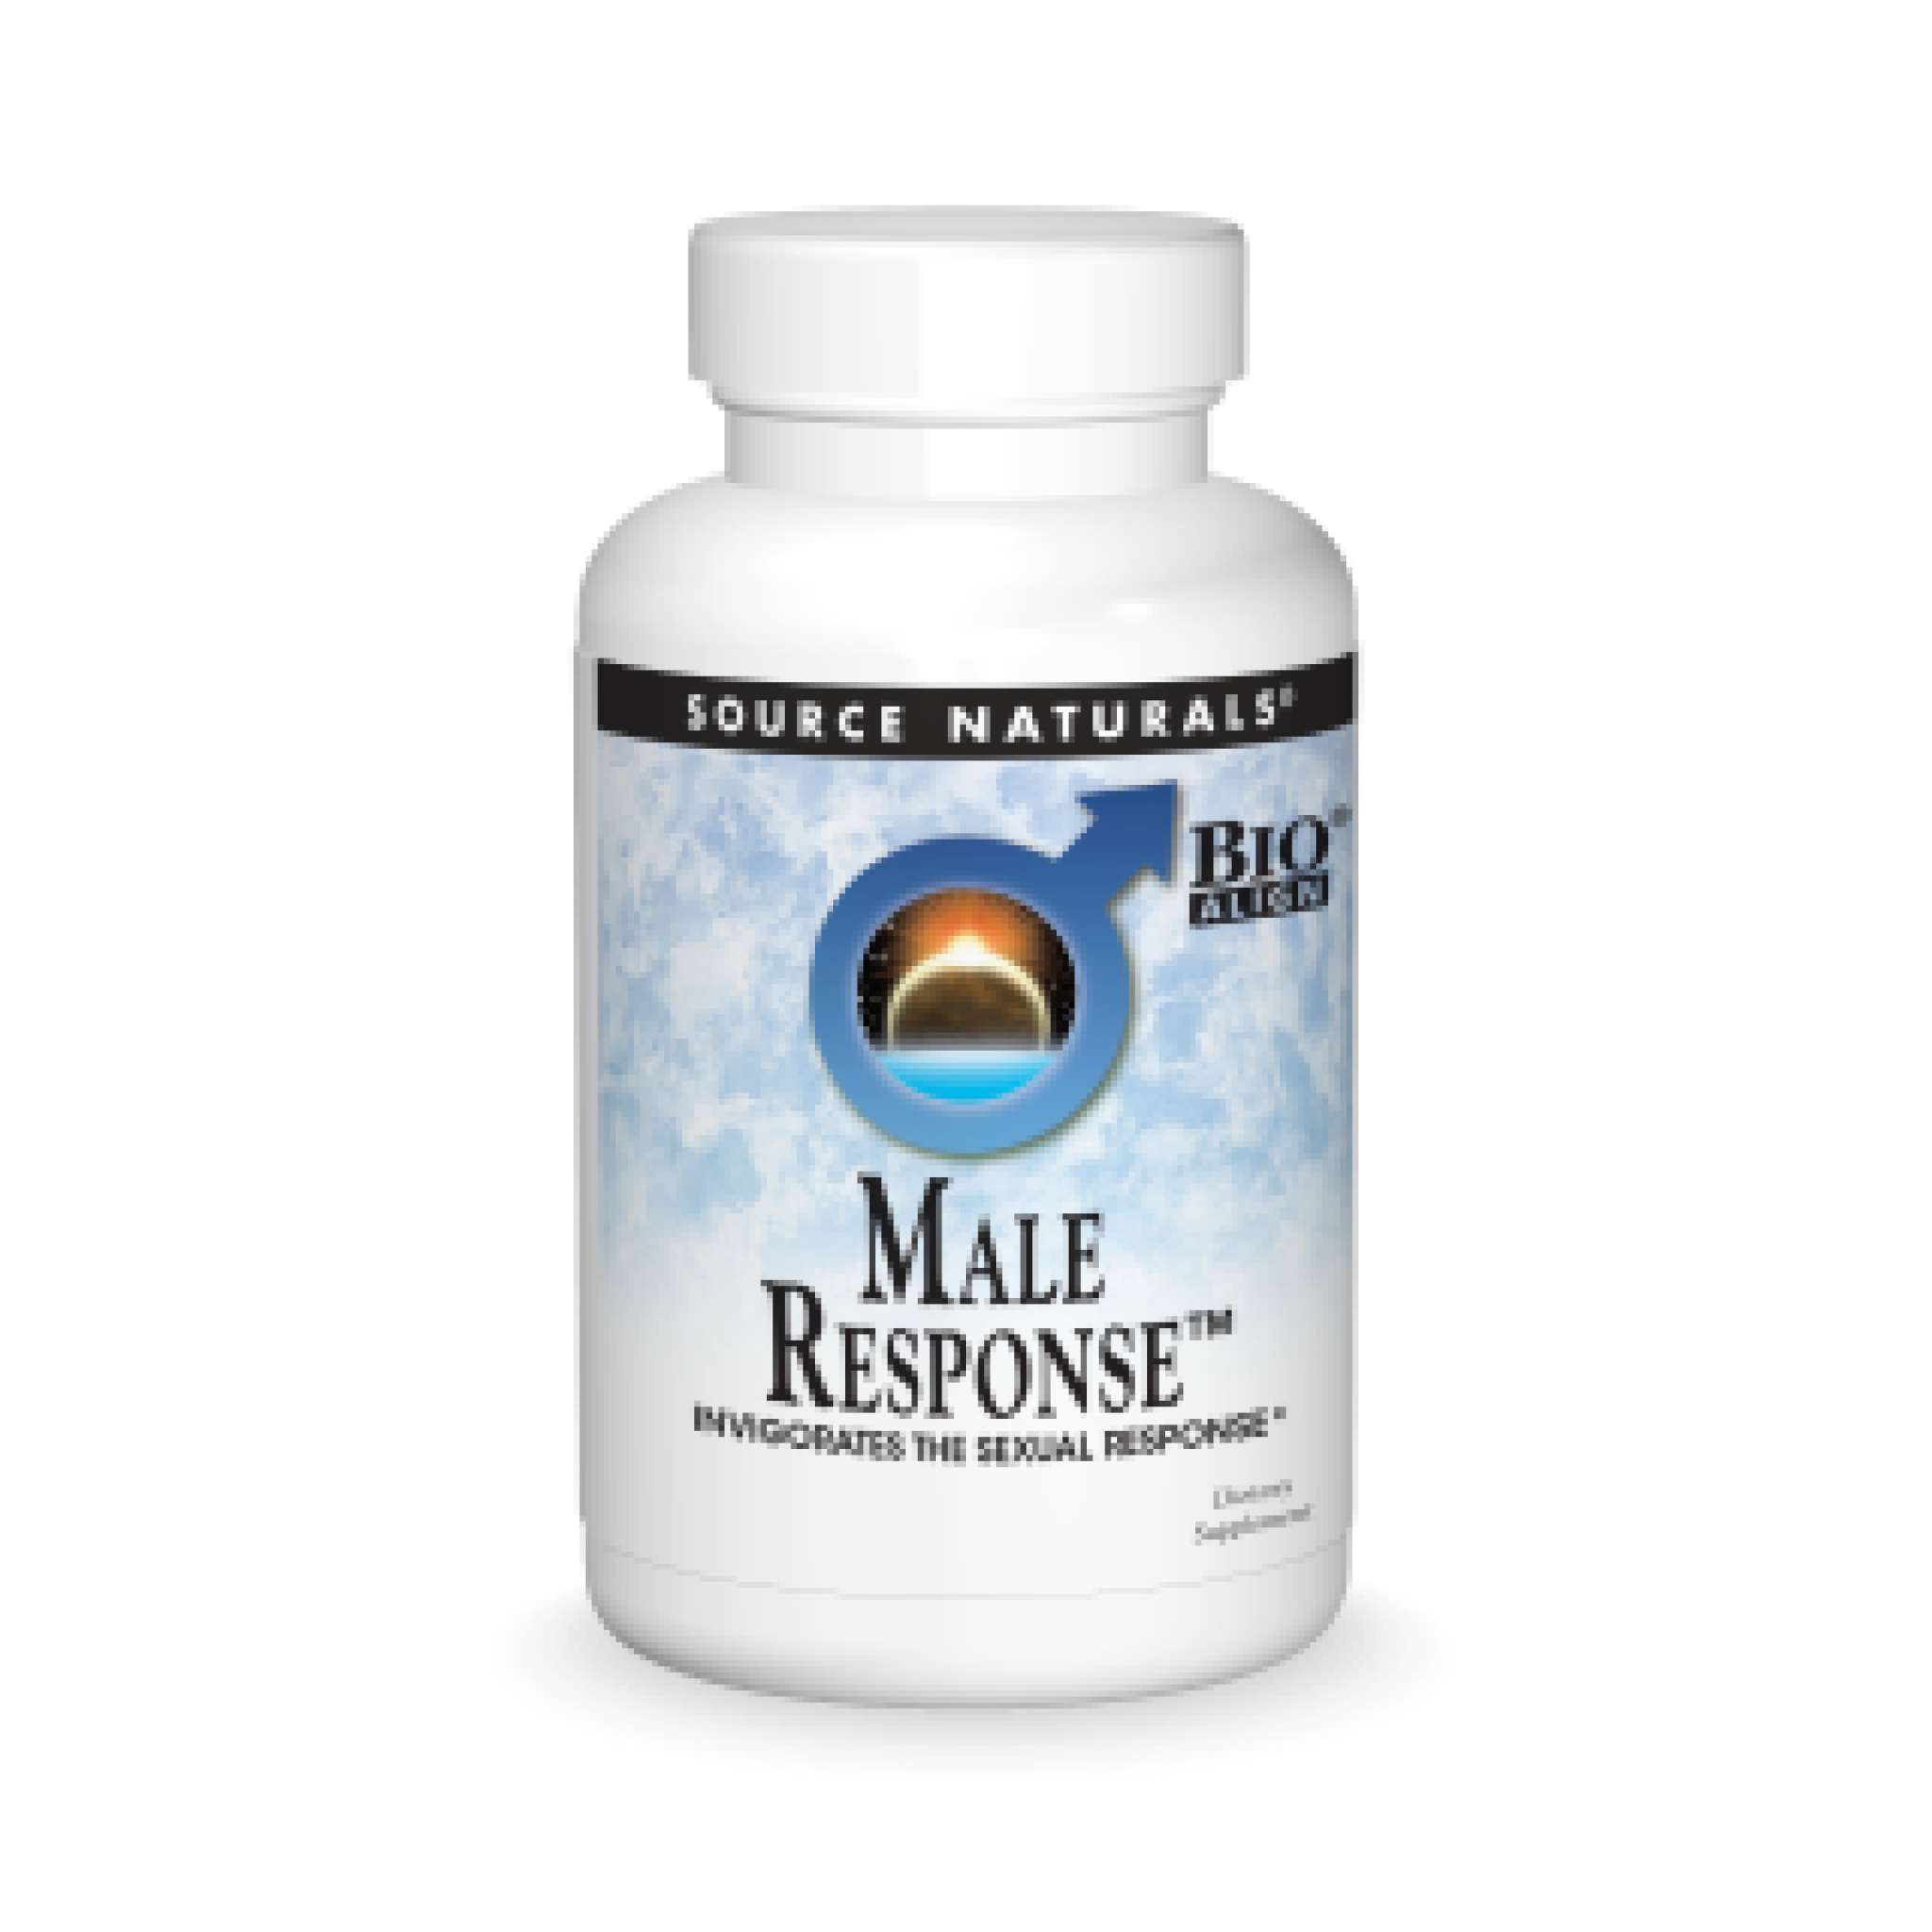 Source Naturals - Male Response